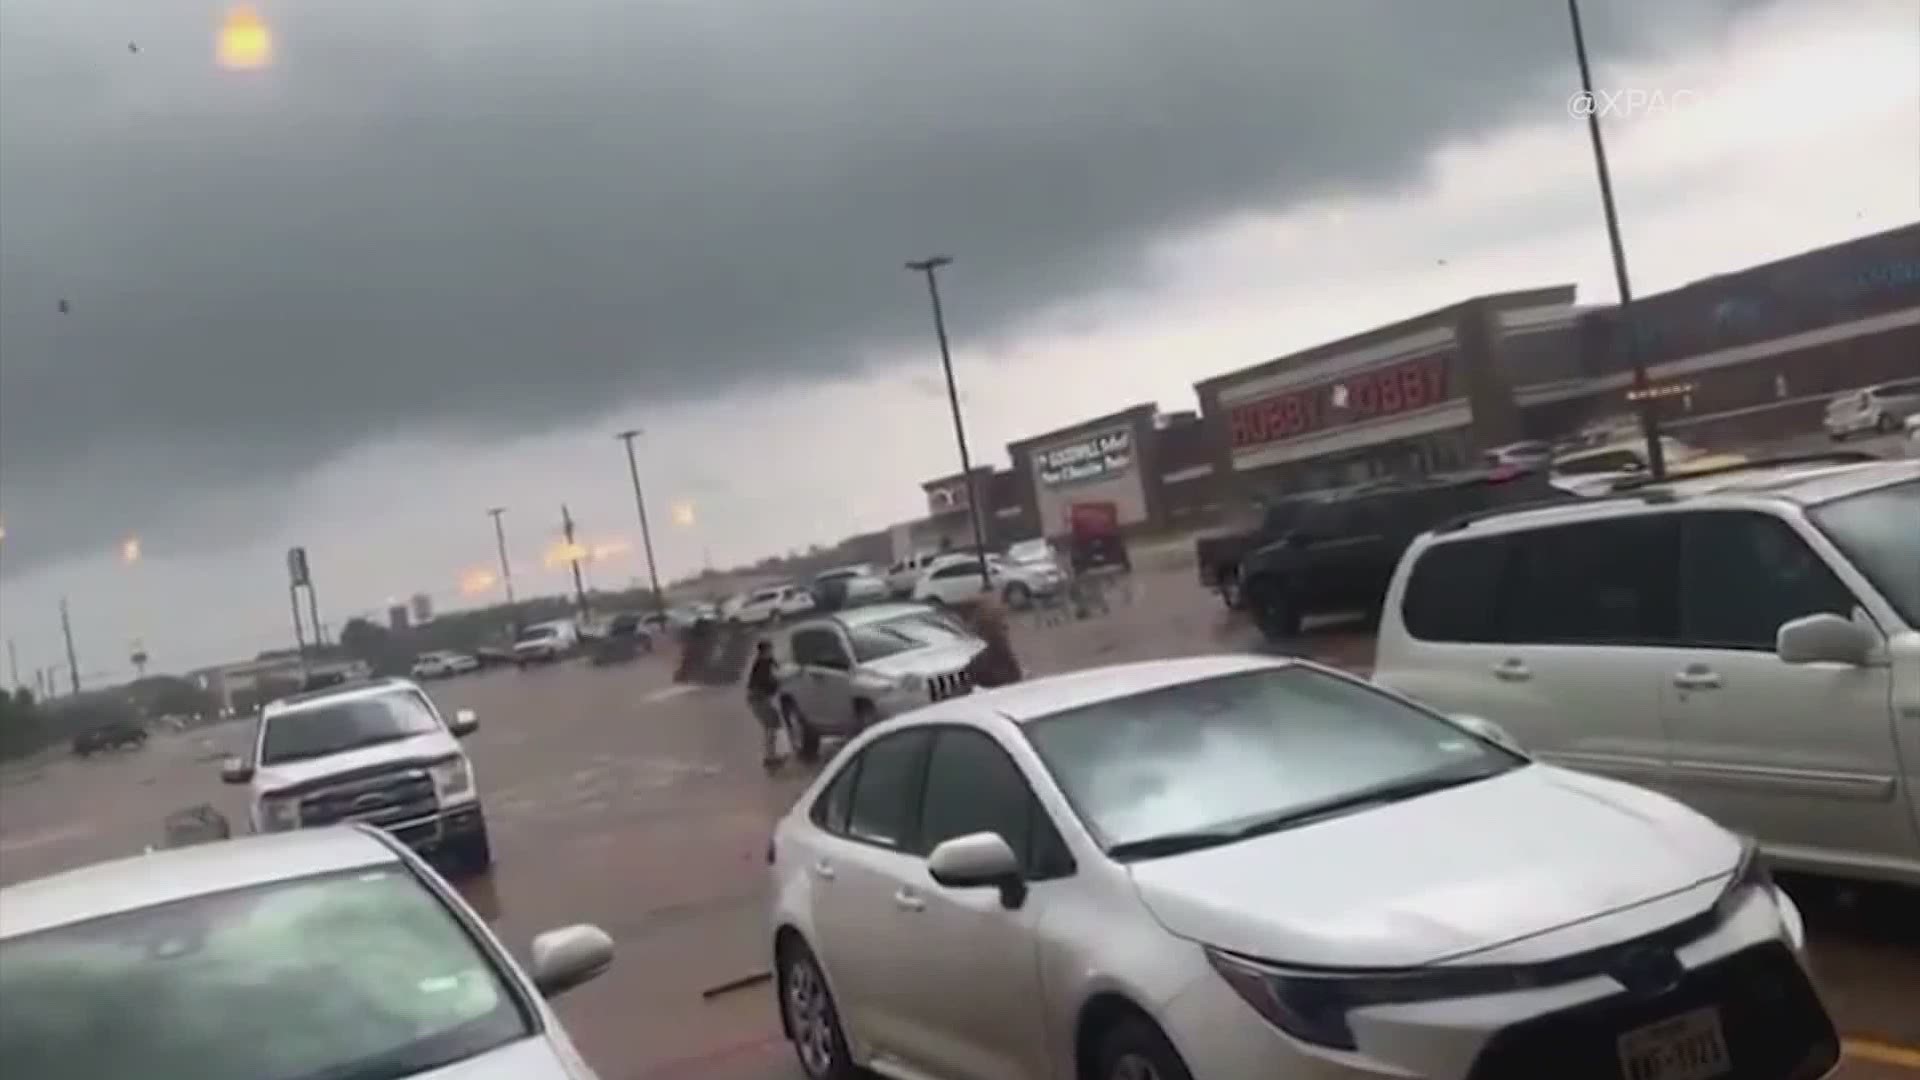 The tornado send people running for cover.  Fortunately, there were no reports of injuries.